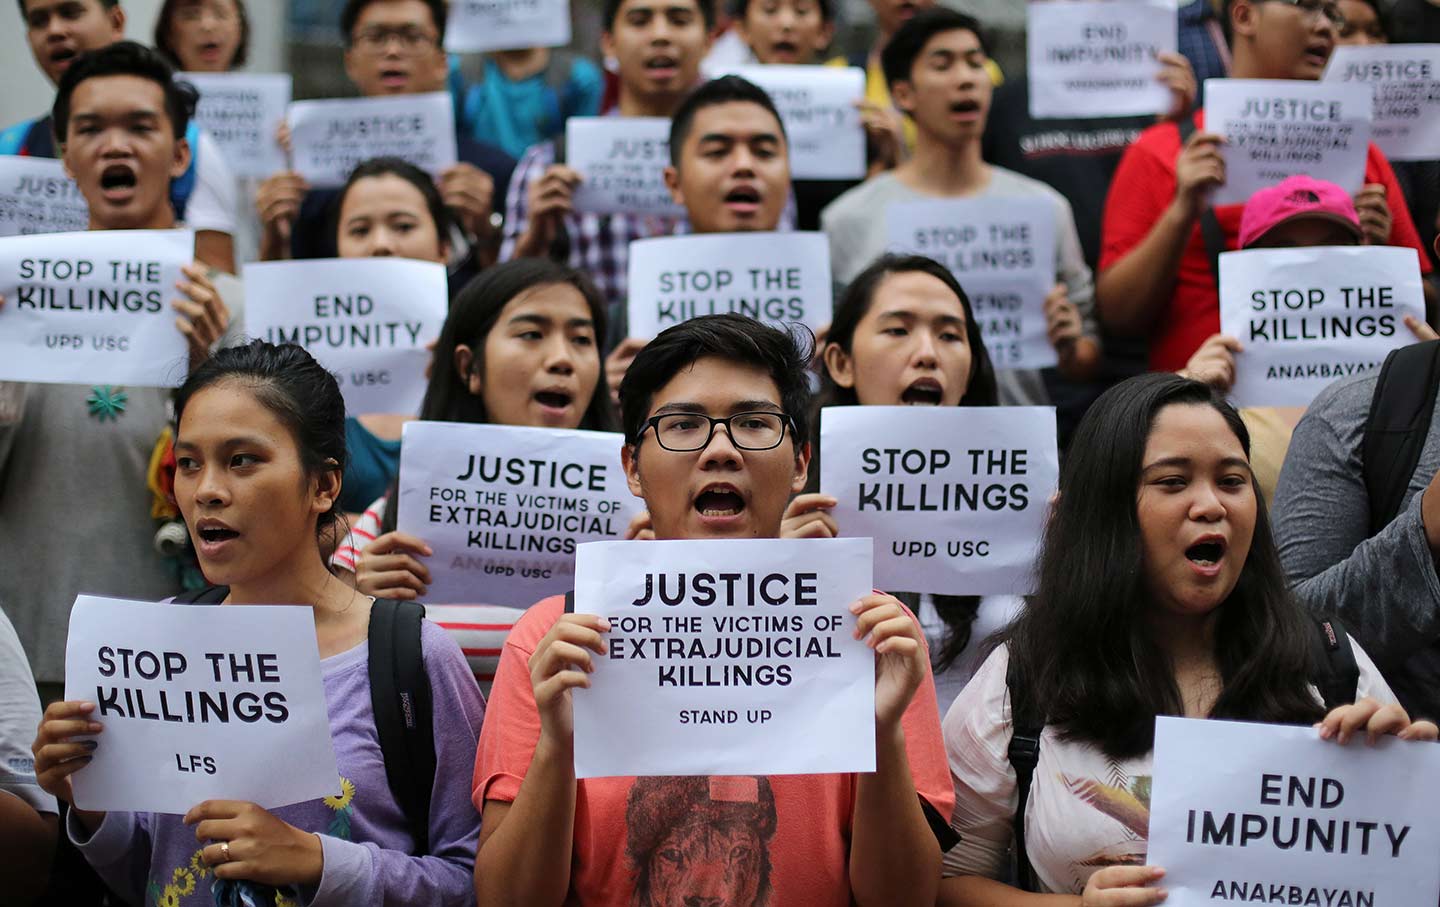 Students at the University of the Philippines protest Duterte